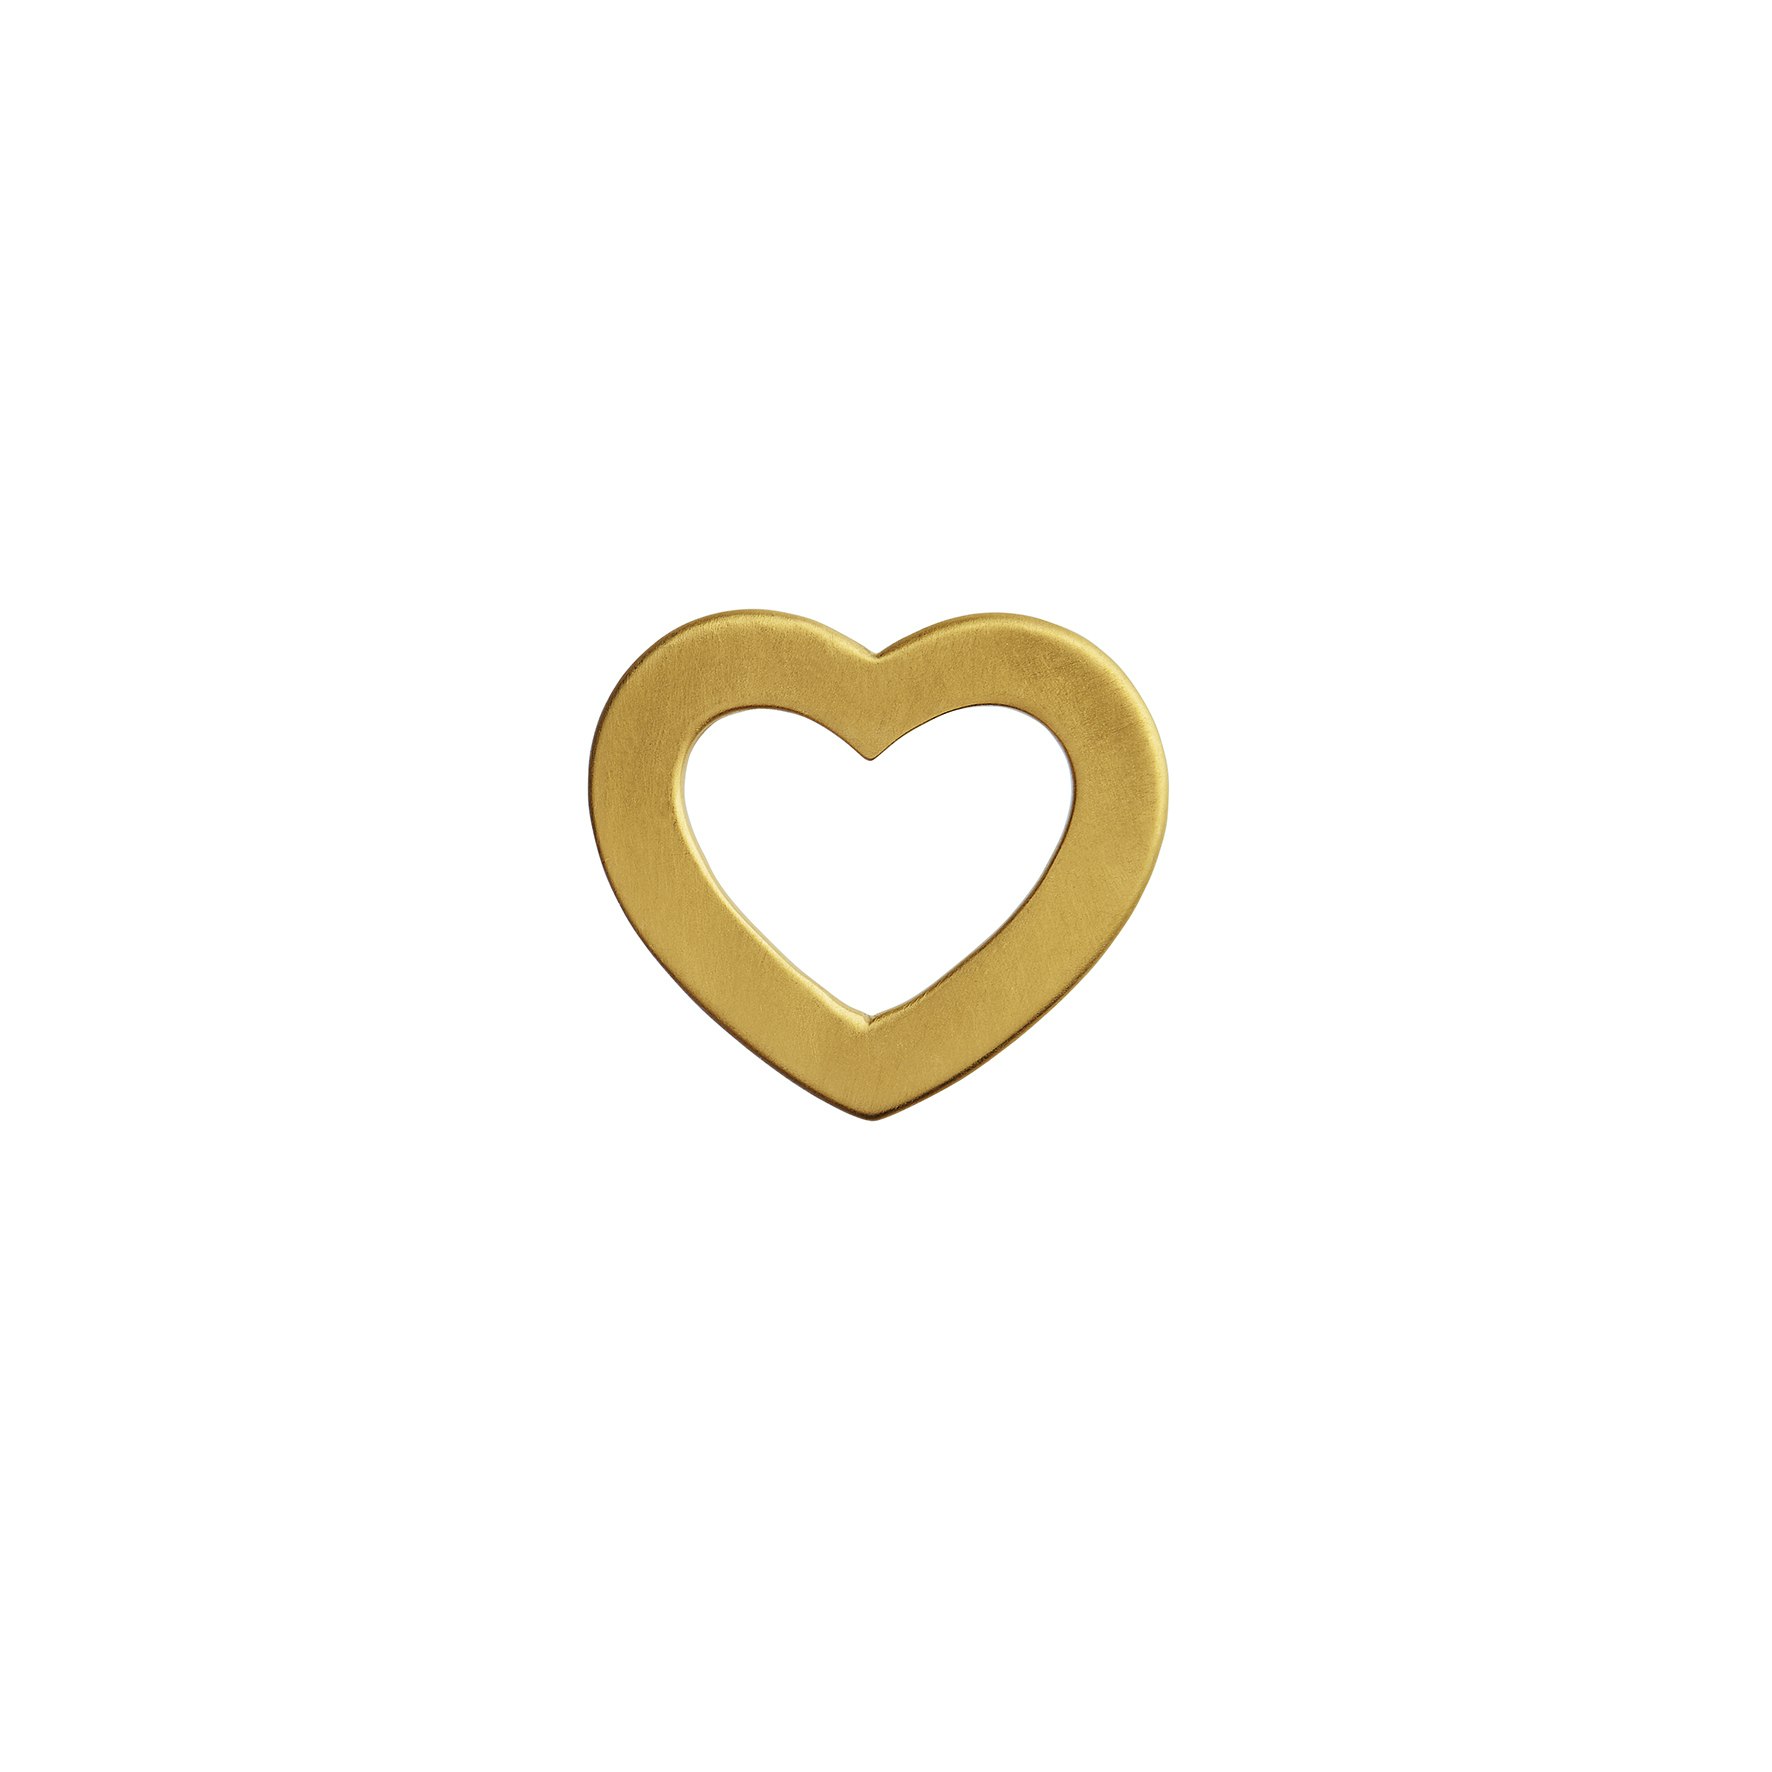 Open Love Heart Pendant from STINE A Jewelry in Goldplated Silver Sterling 925